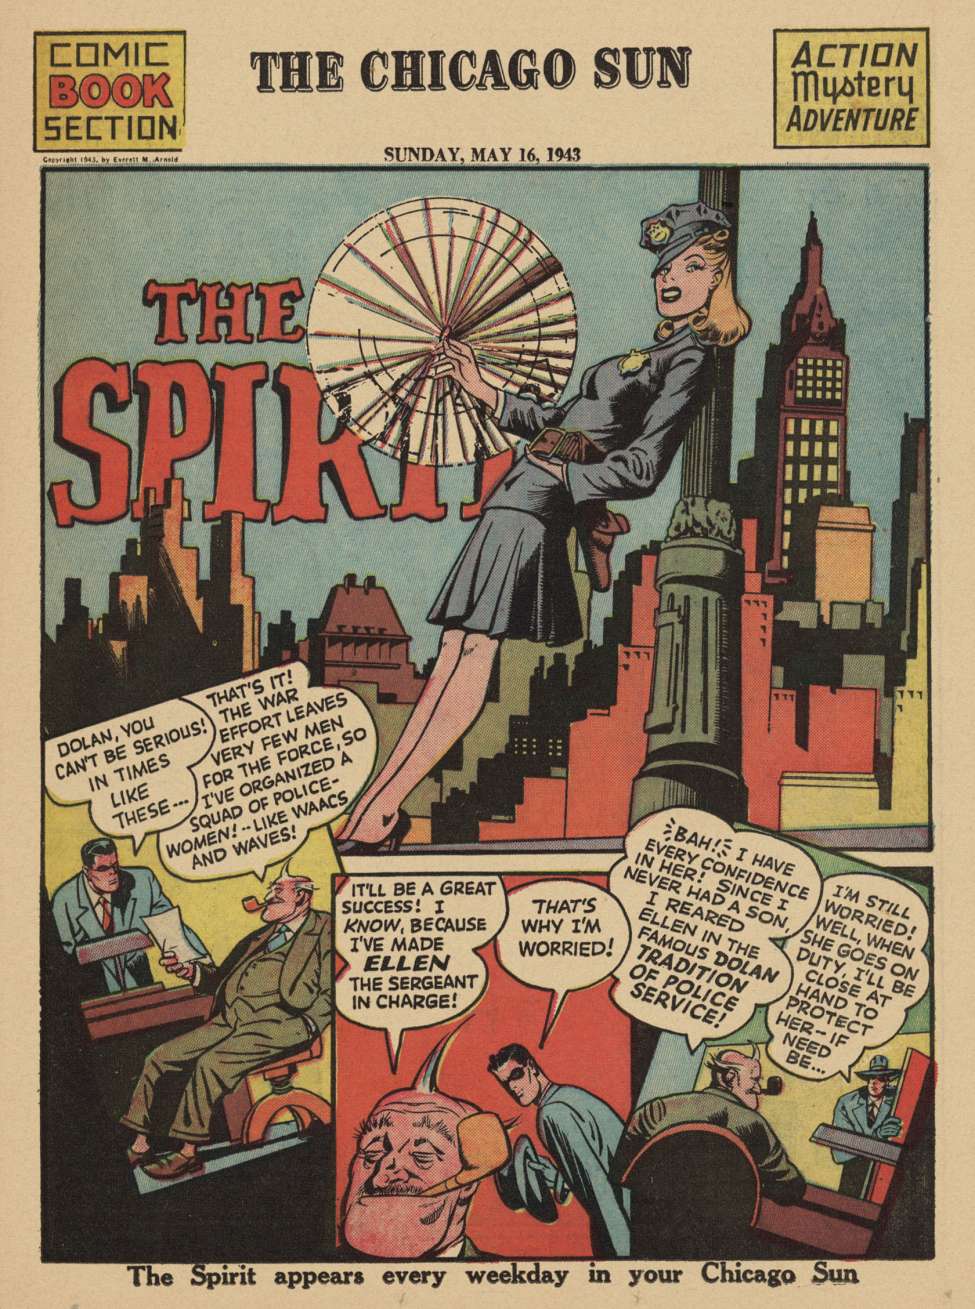 Comic Book Cover For The Spirit (1943-05-16) - Chicago Sun